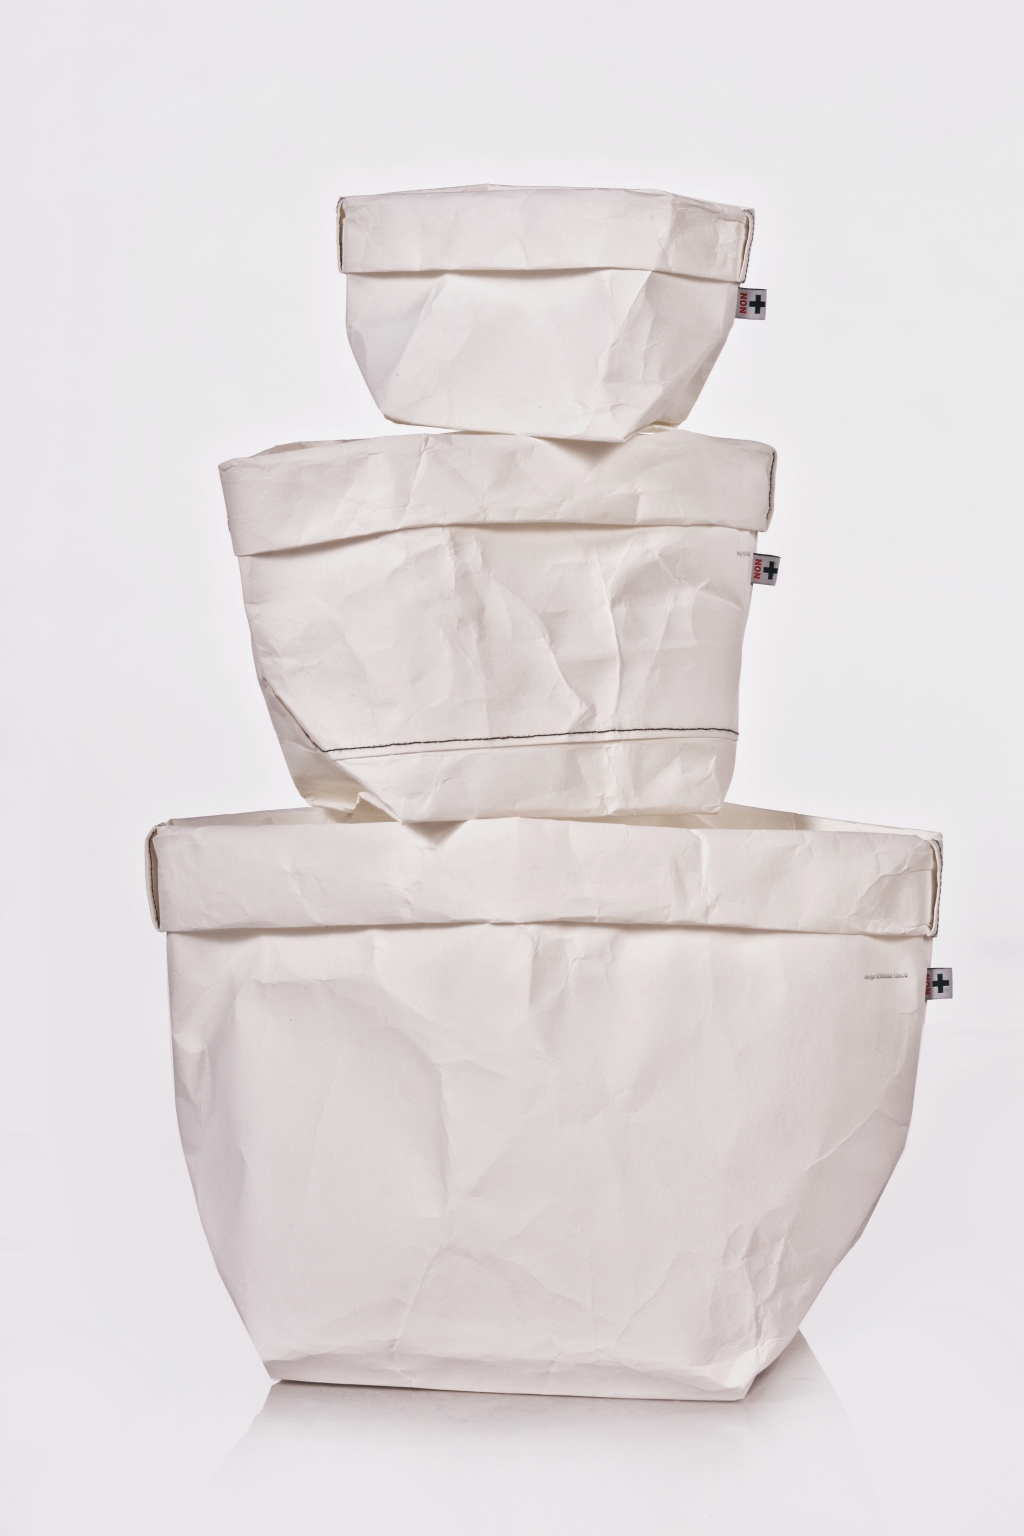 + PACK whitefamily // sacks and lamps // Material: washable cellulosa fibre